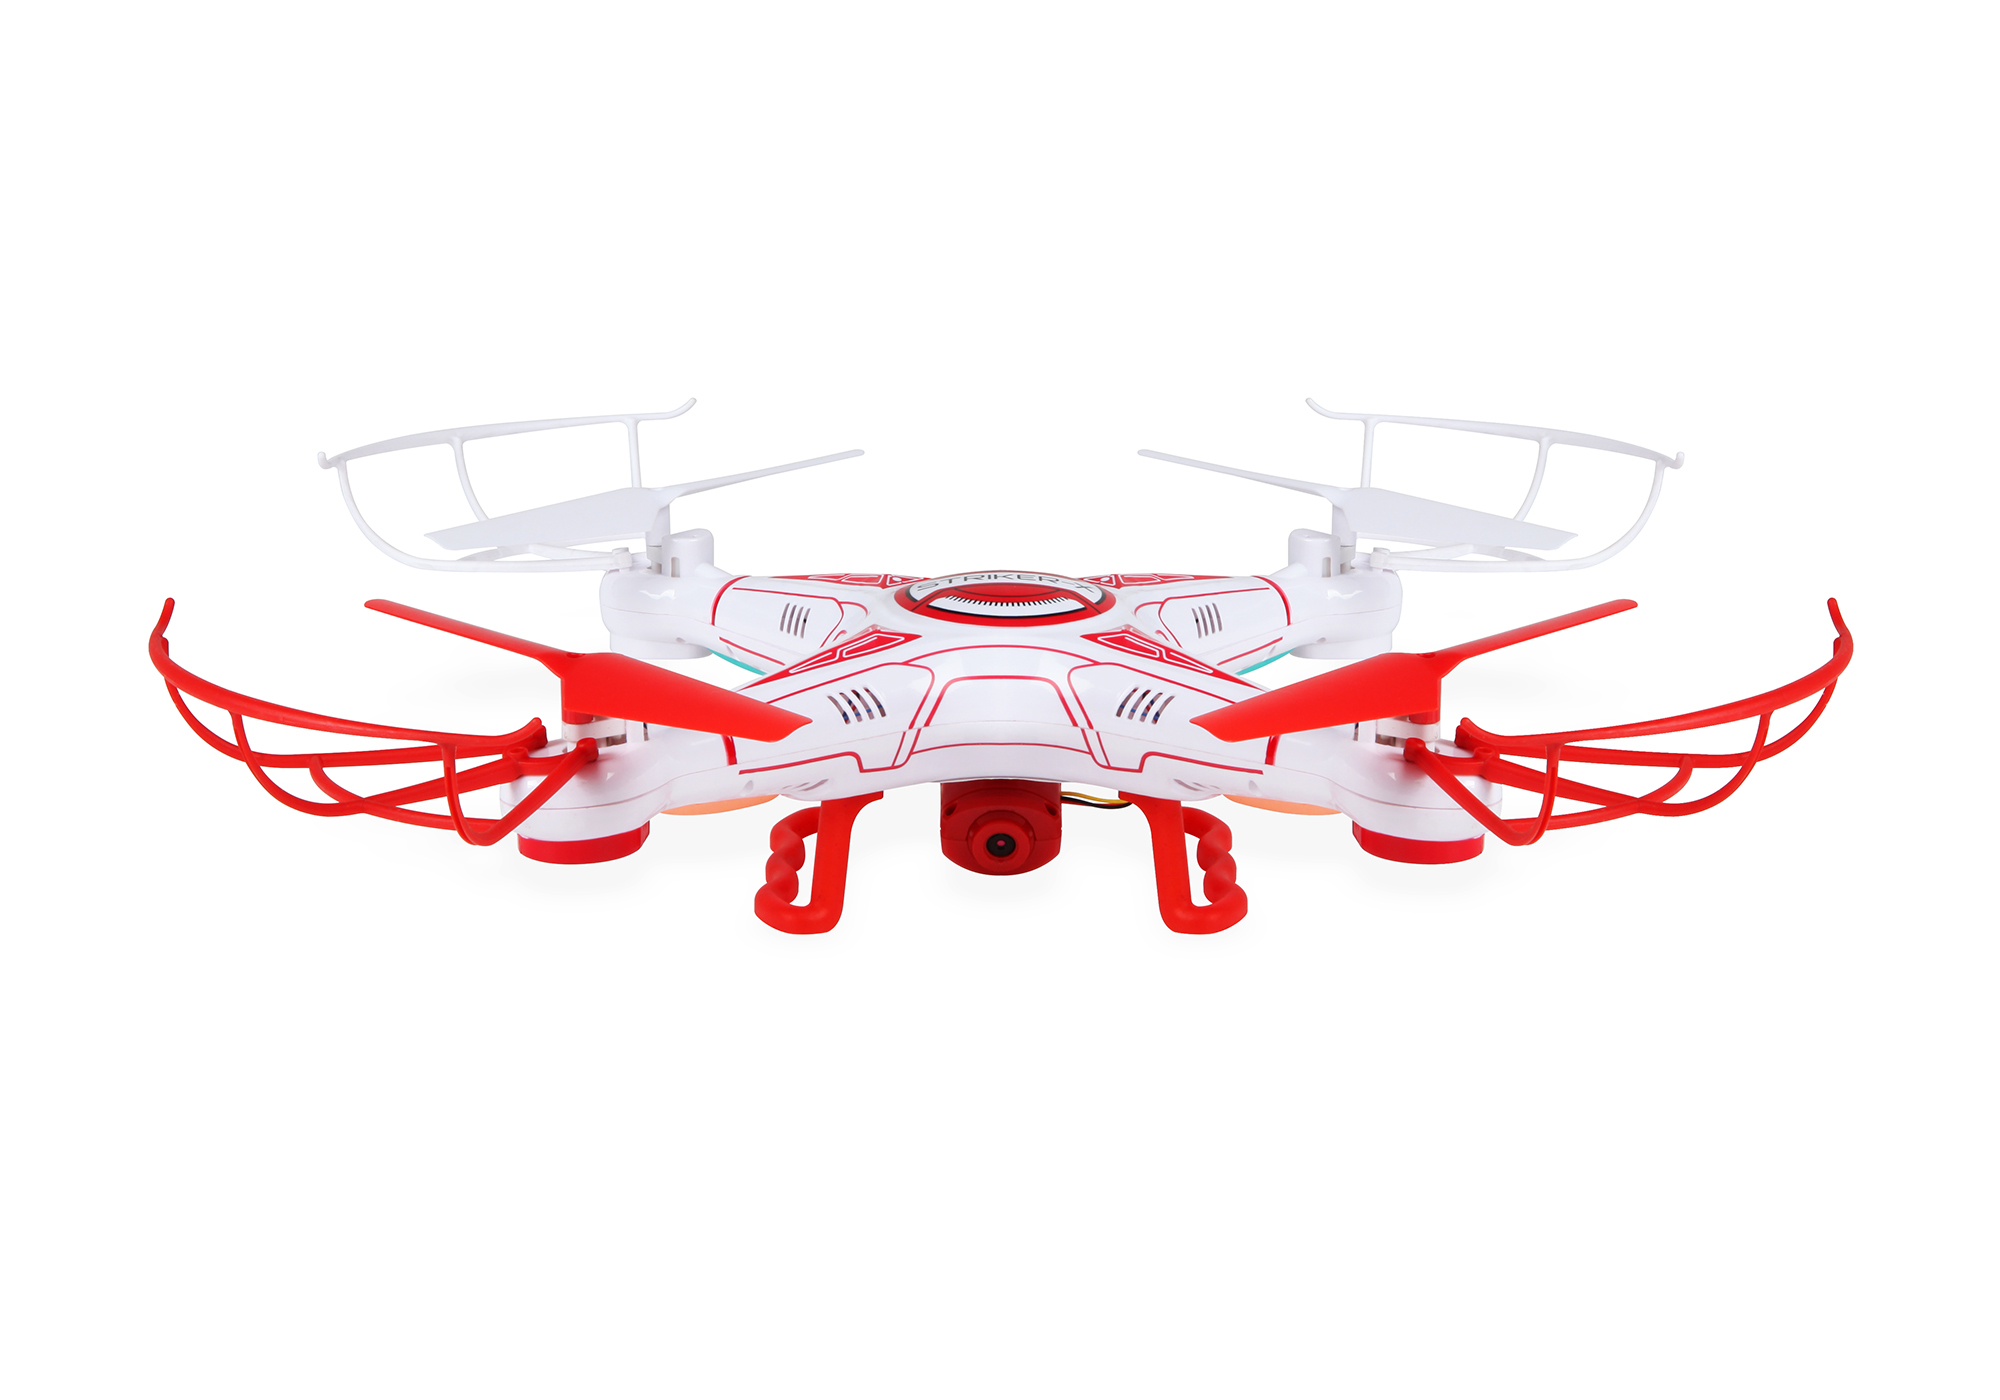 Striker-X HD Camera Drone 2.4GHz 4.5CH HD Picture/Video Camera RC Quadcopter - image 4 of 6